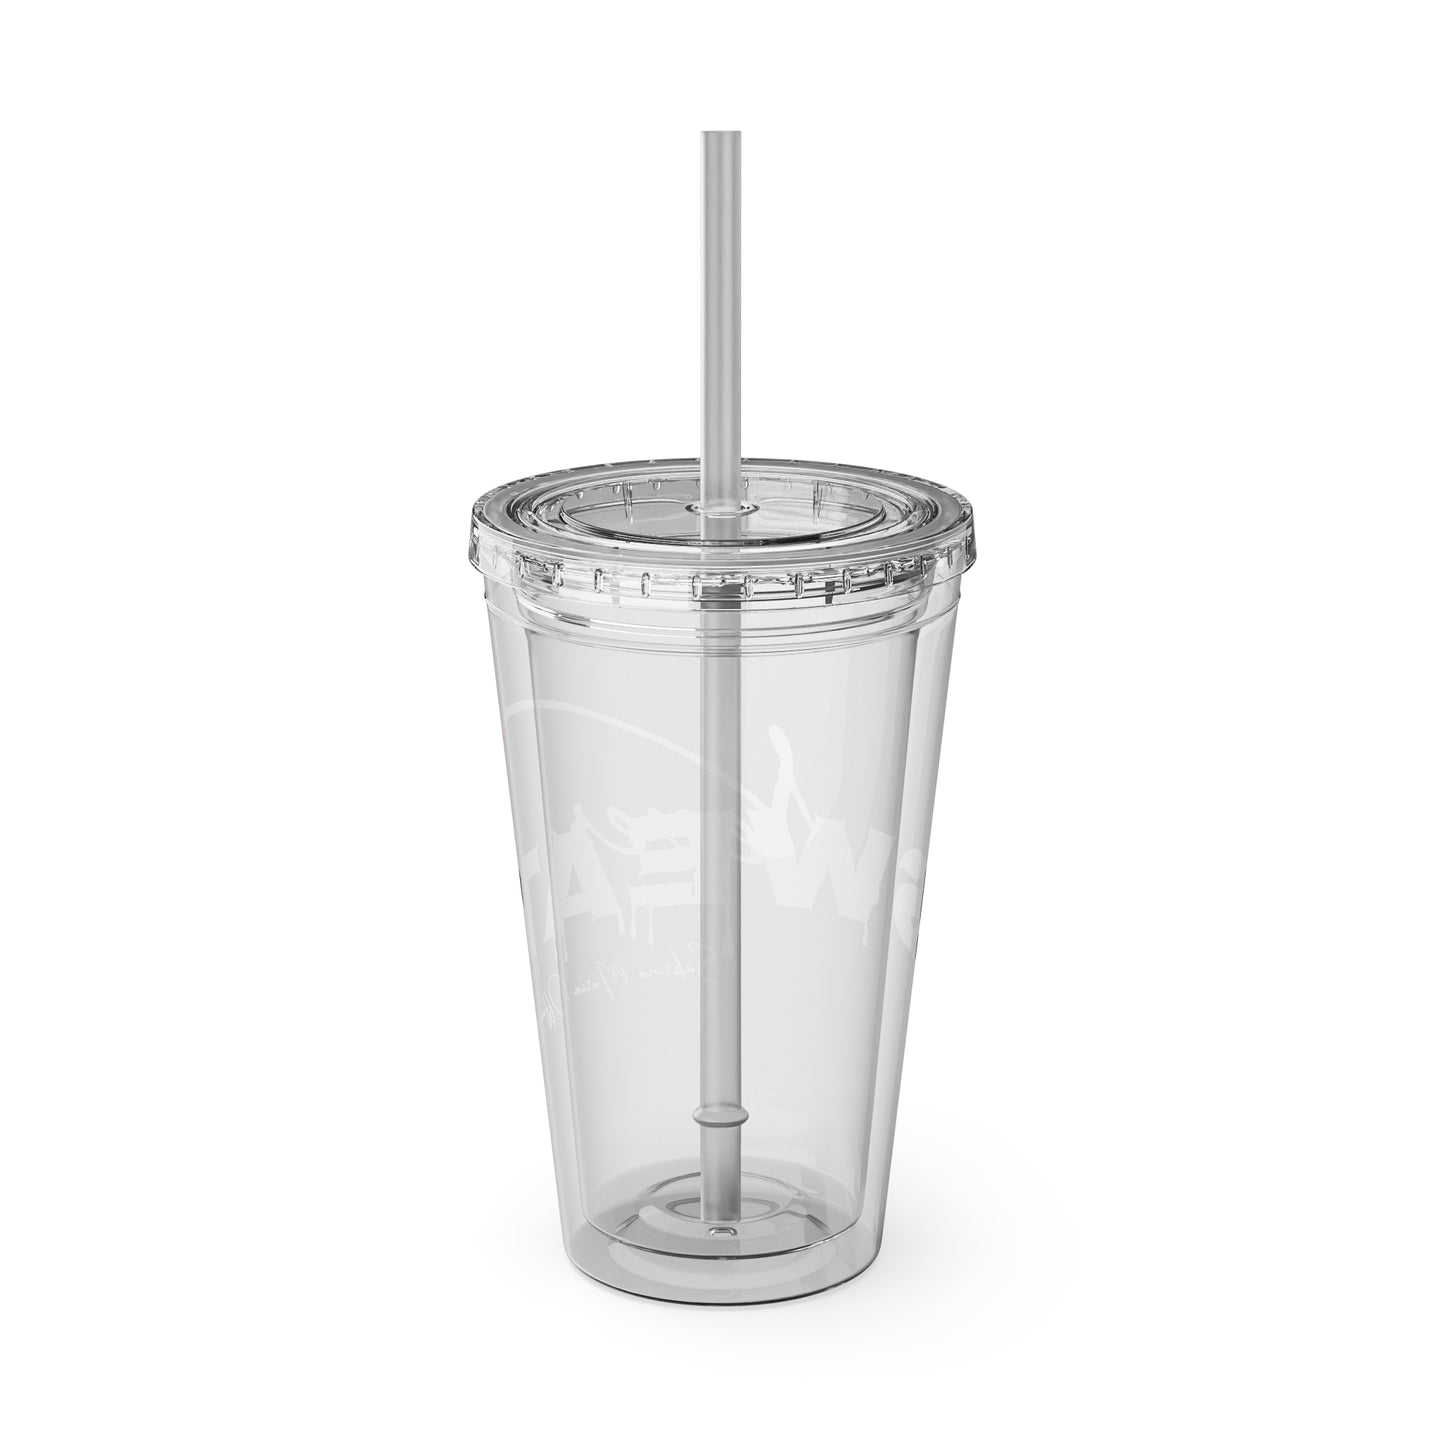 Never Sweat Official Sunsplash Tumbler with Straw, 16oz pink